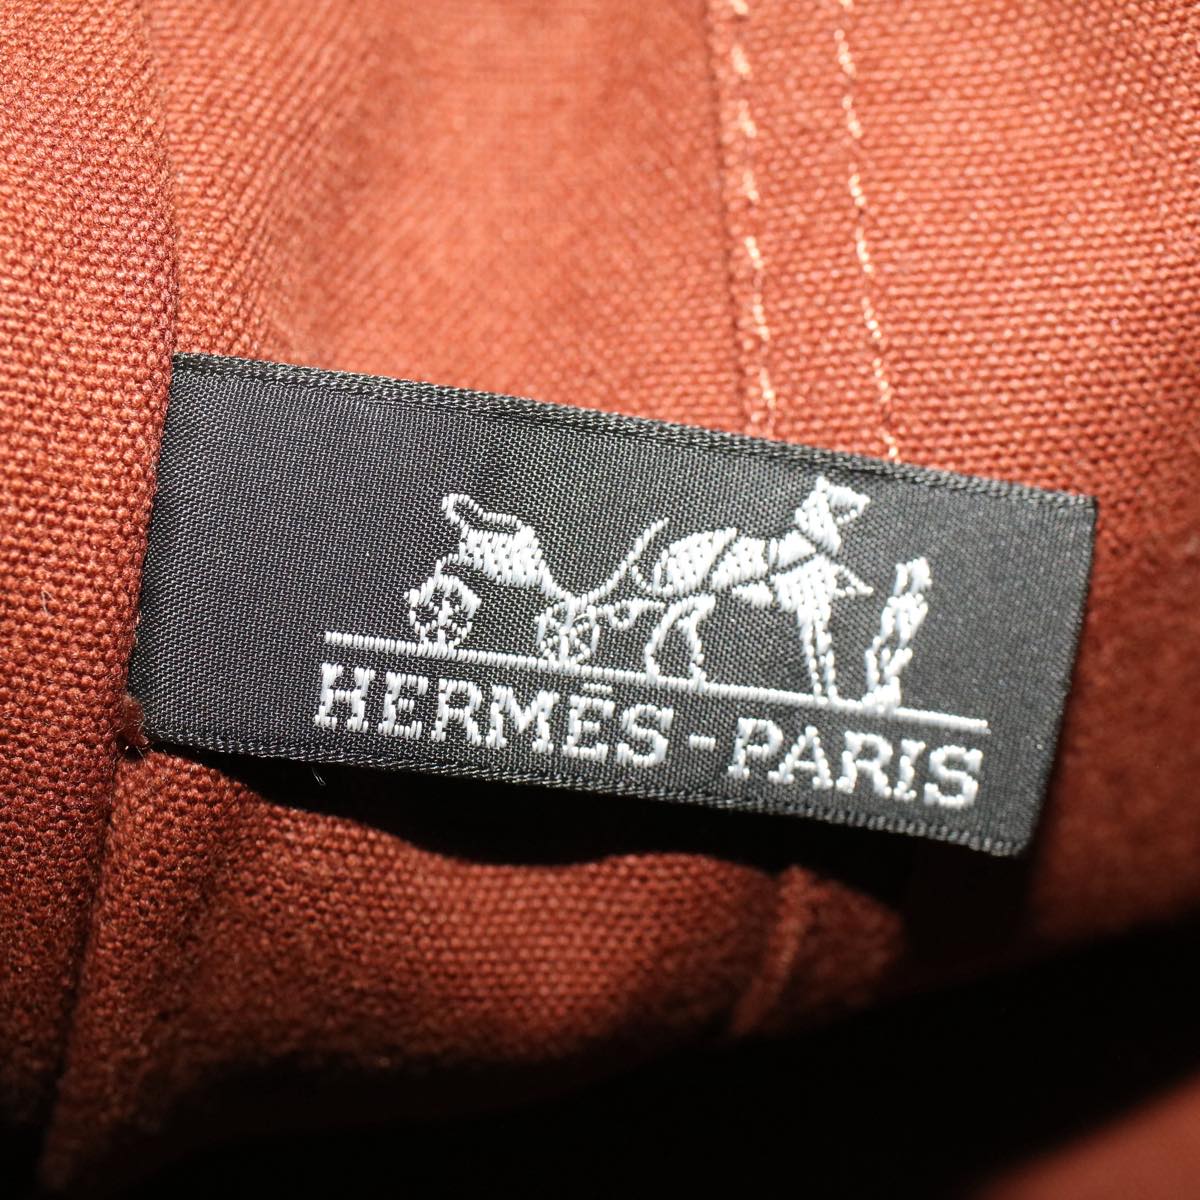 HERMES Fourre Tout MM Hand Bag Canvas Brown Auth bs7630